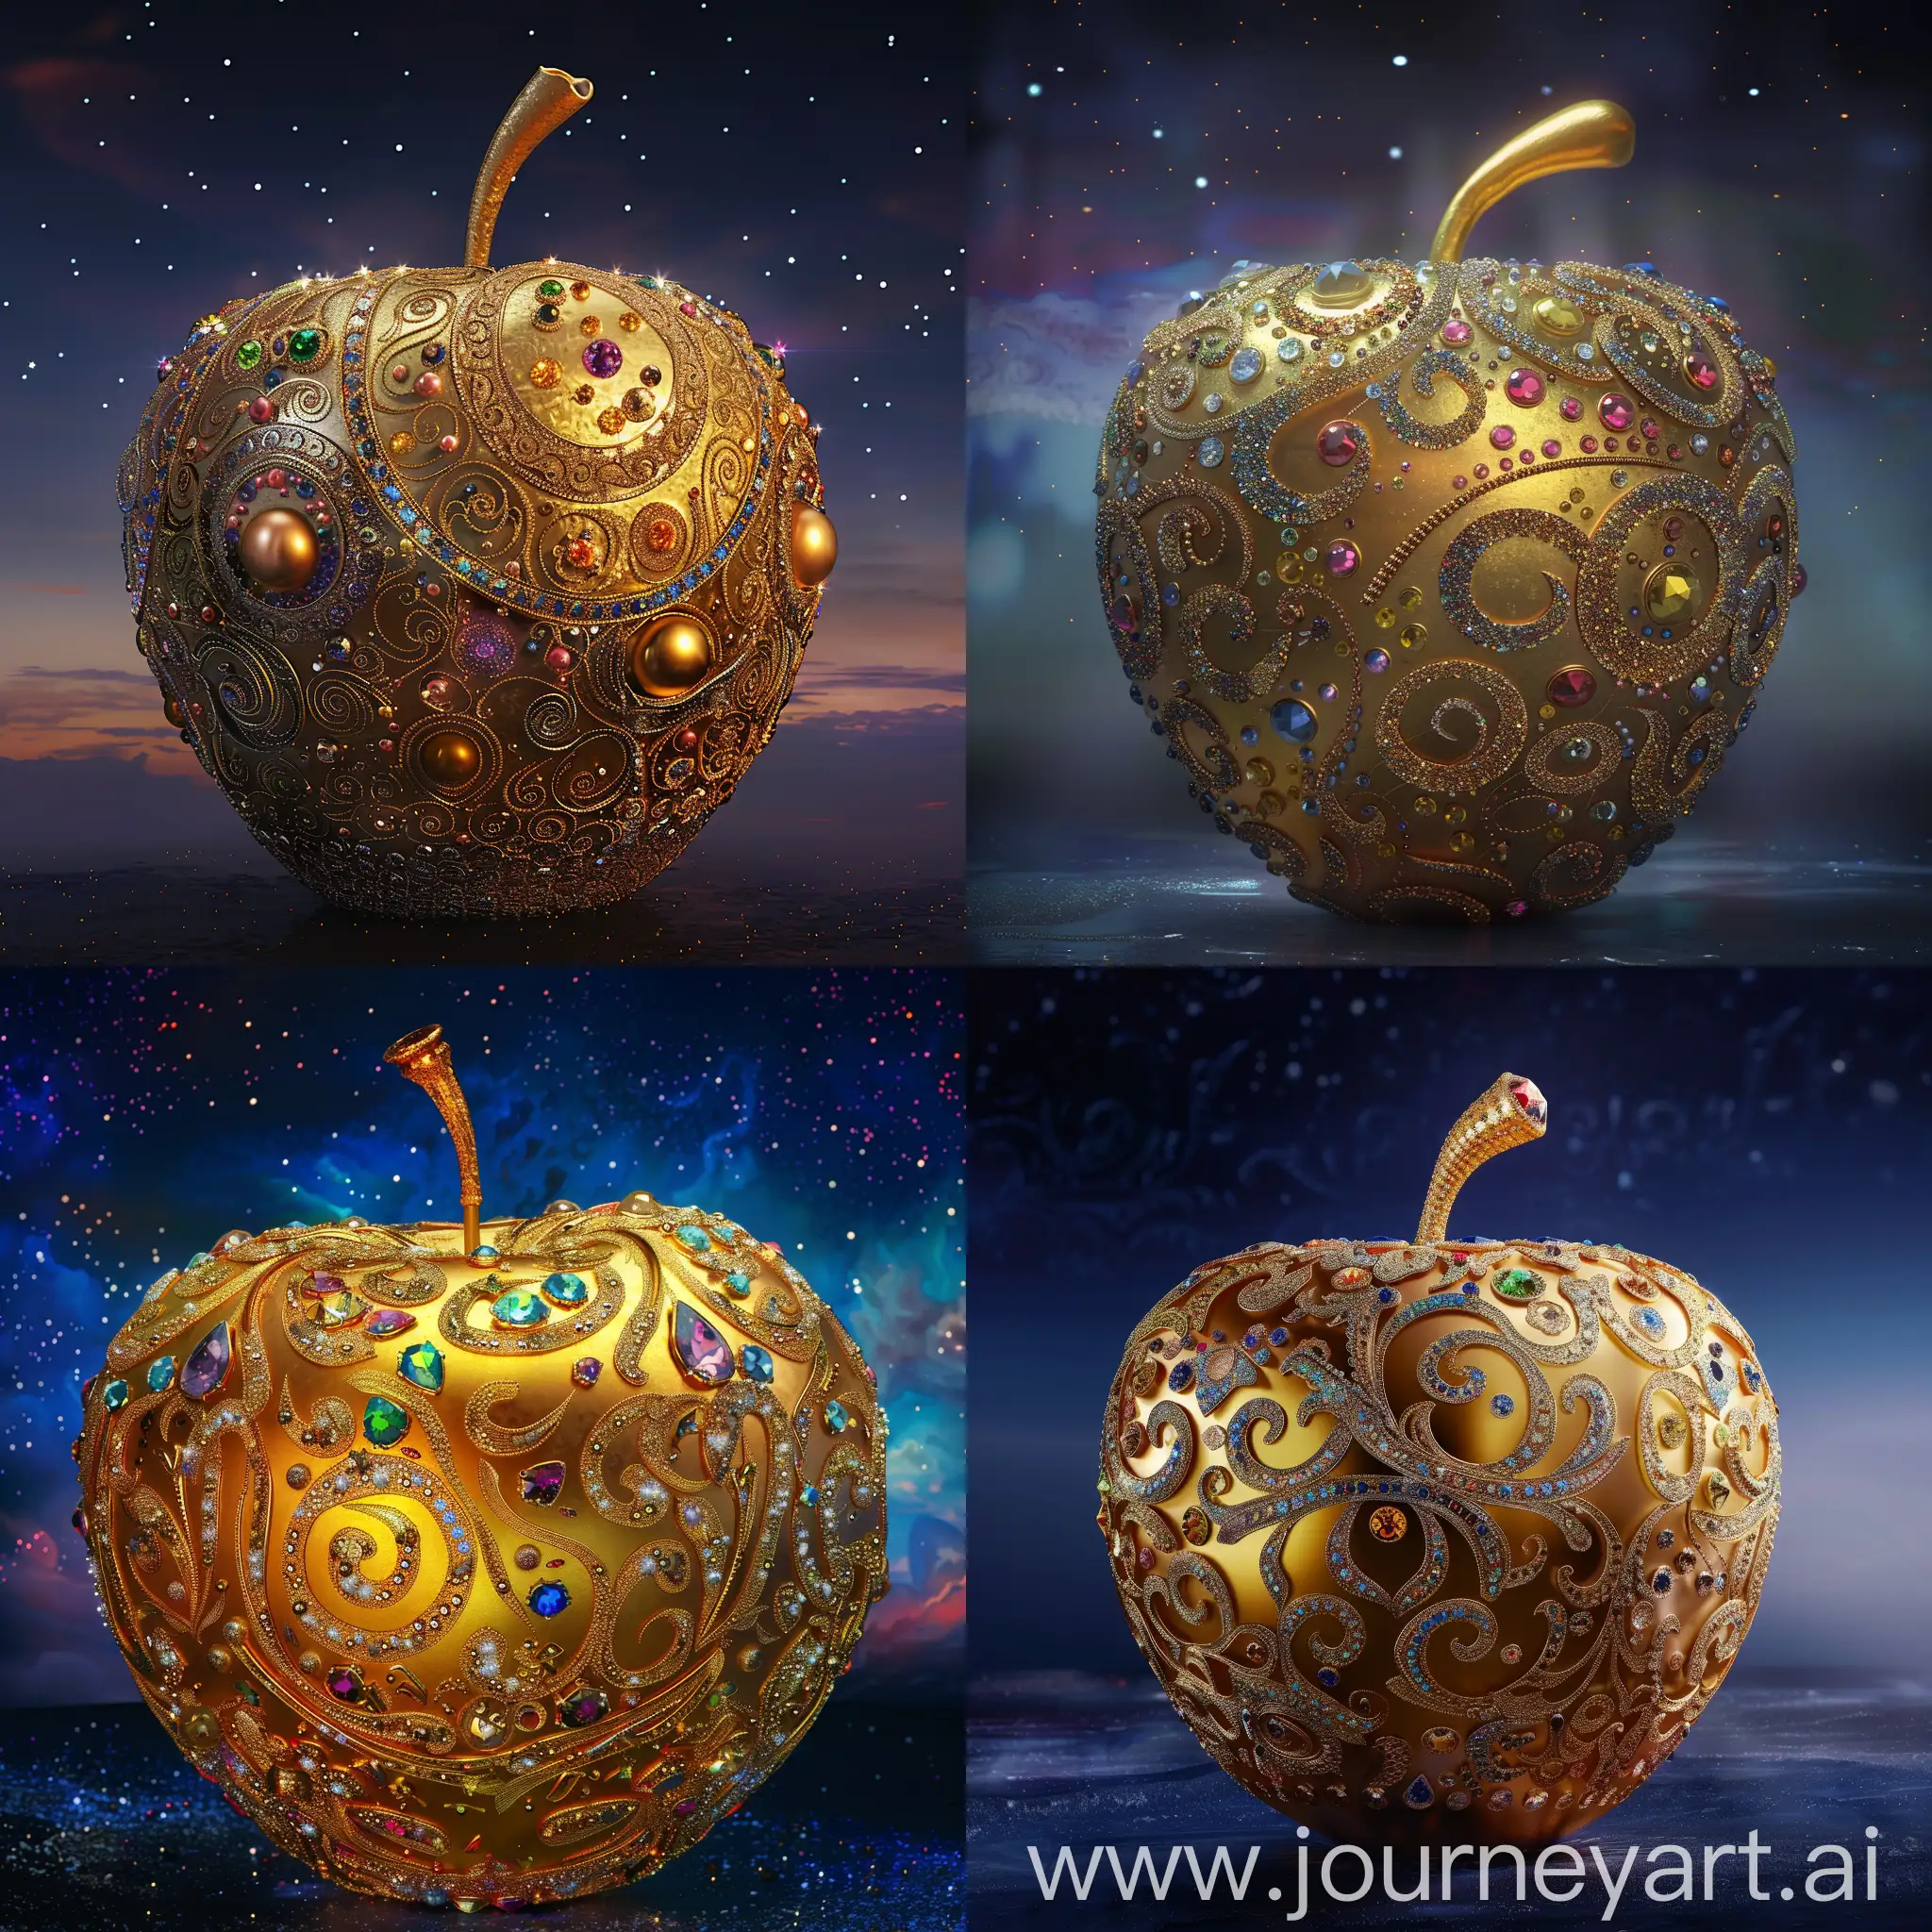 Golden-Apple-Adorned-with-Precious-Stones-Against-Night-Sky